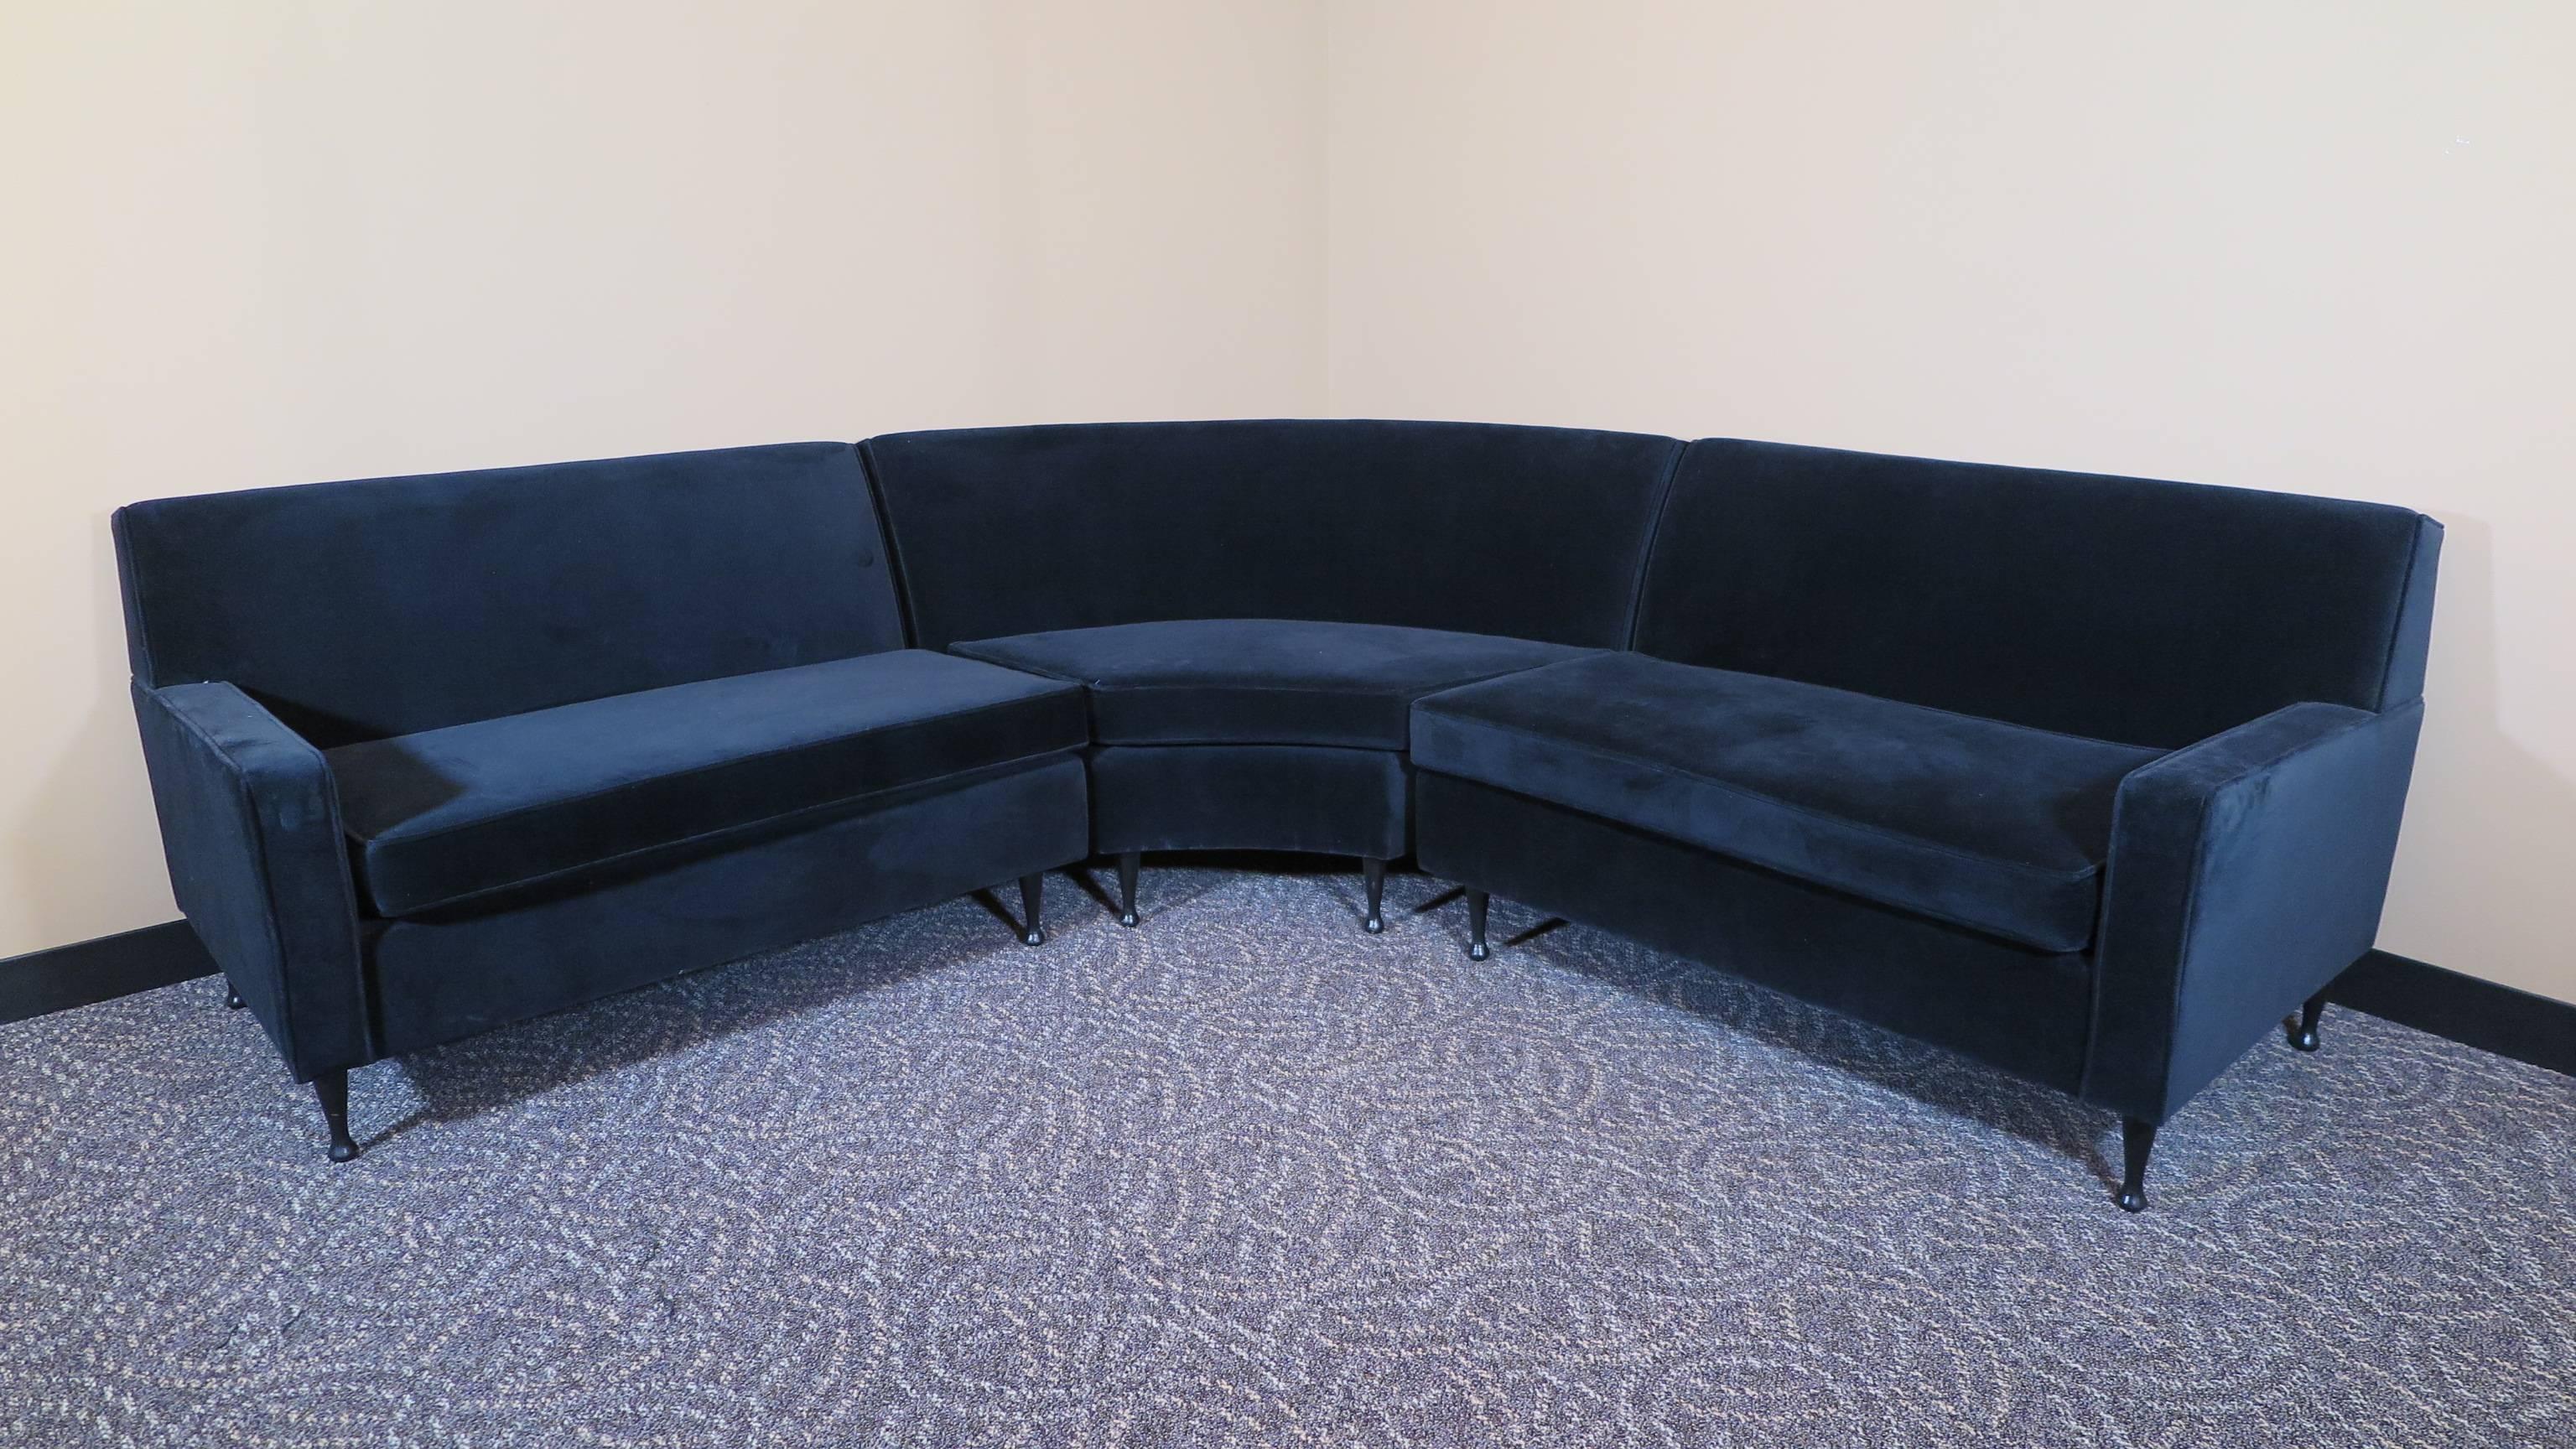 A Mid-Century Modern curved sectional sofa in the style of Paul McCobb symmetric group. Midcentury corner sofa in black velvet. Very comfortable, in very good condition.
Size two pieces 64 wide, centre piece is 45 wide in the back.
 